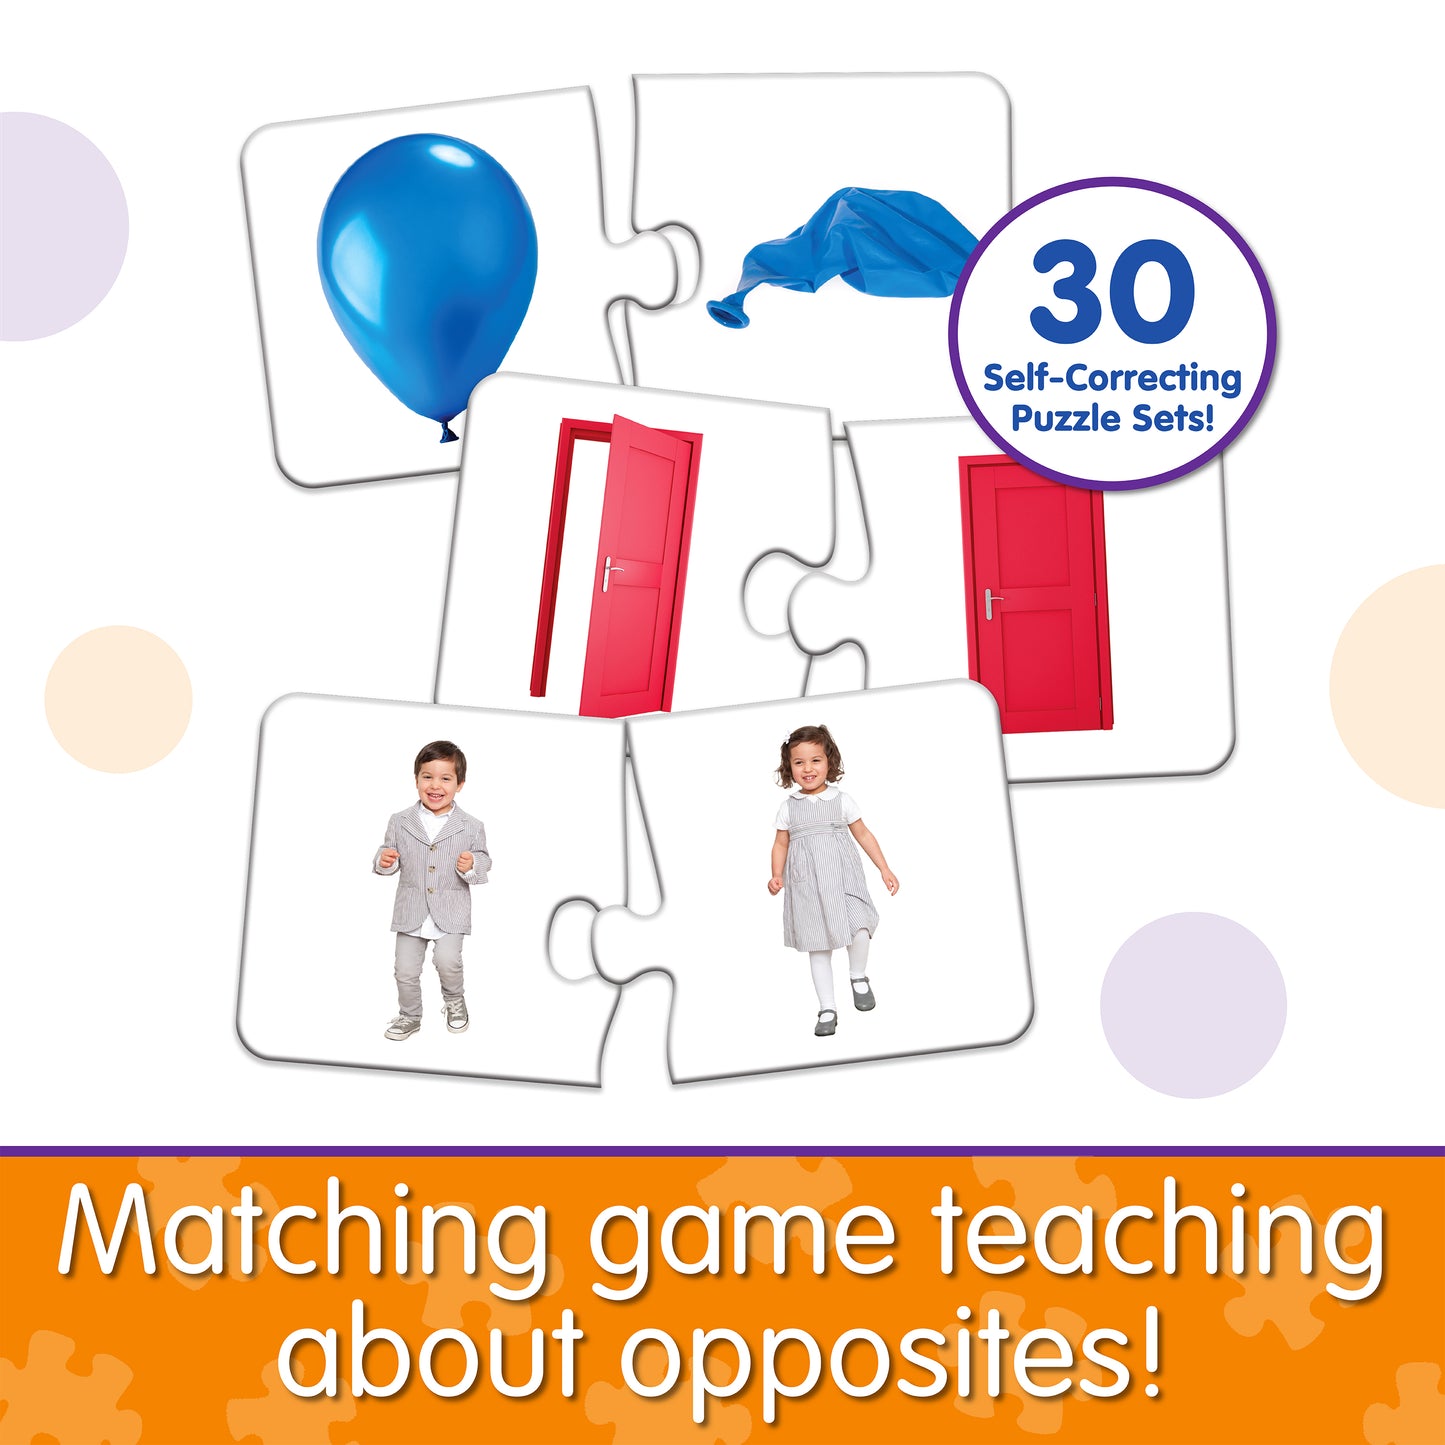 Infographic about Match It - Opposites that says, "Matching game teaching about opposites!"